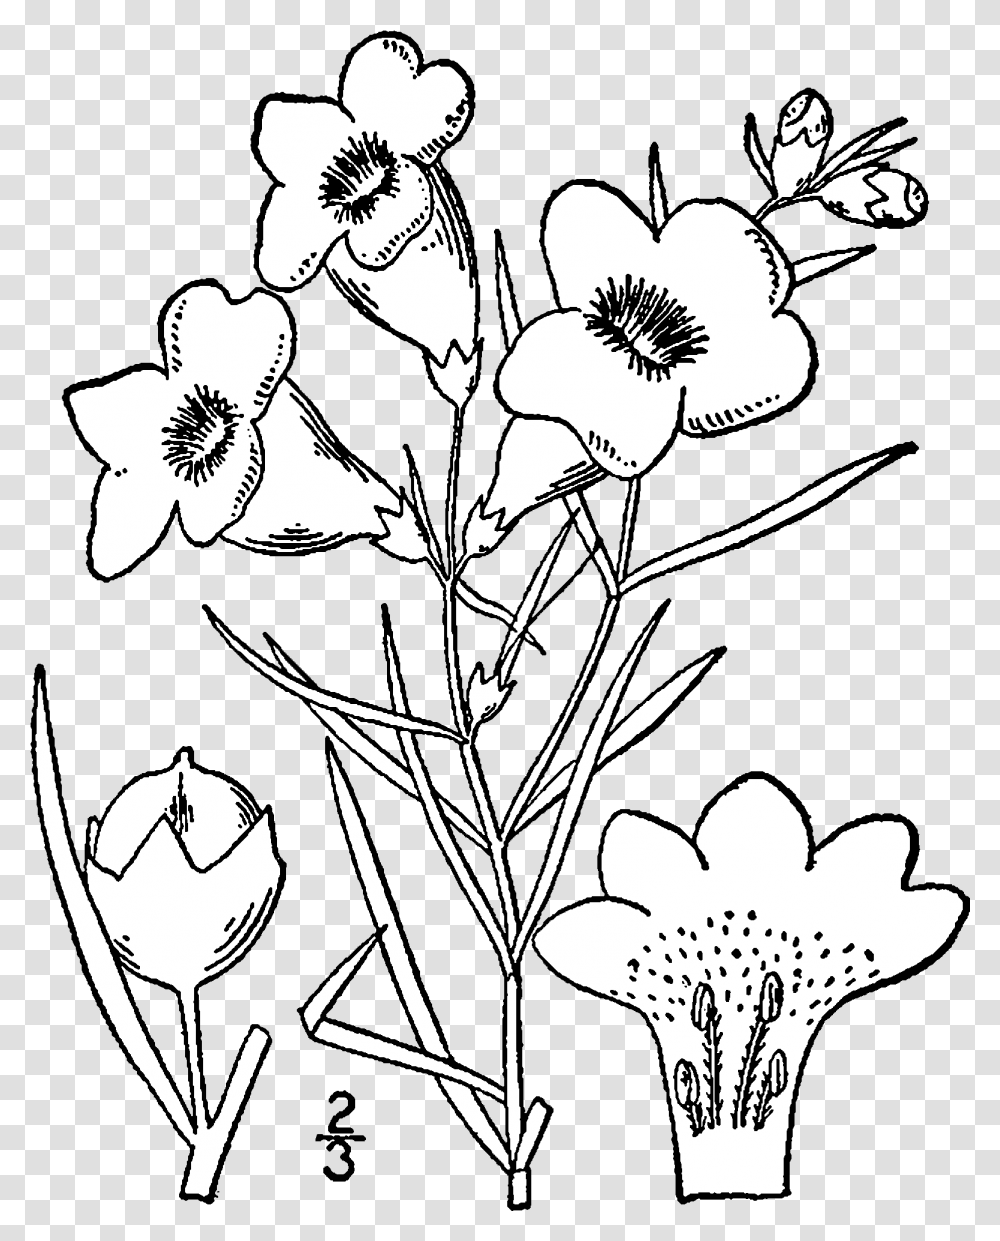 Fileagalinis Purpurea Drawingpng Wikimedia Commons Drawing, Plant, Flower, Blossom, Stencil Transparent Png